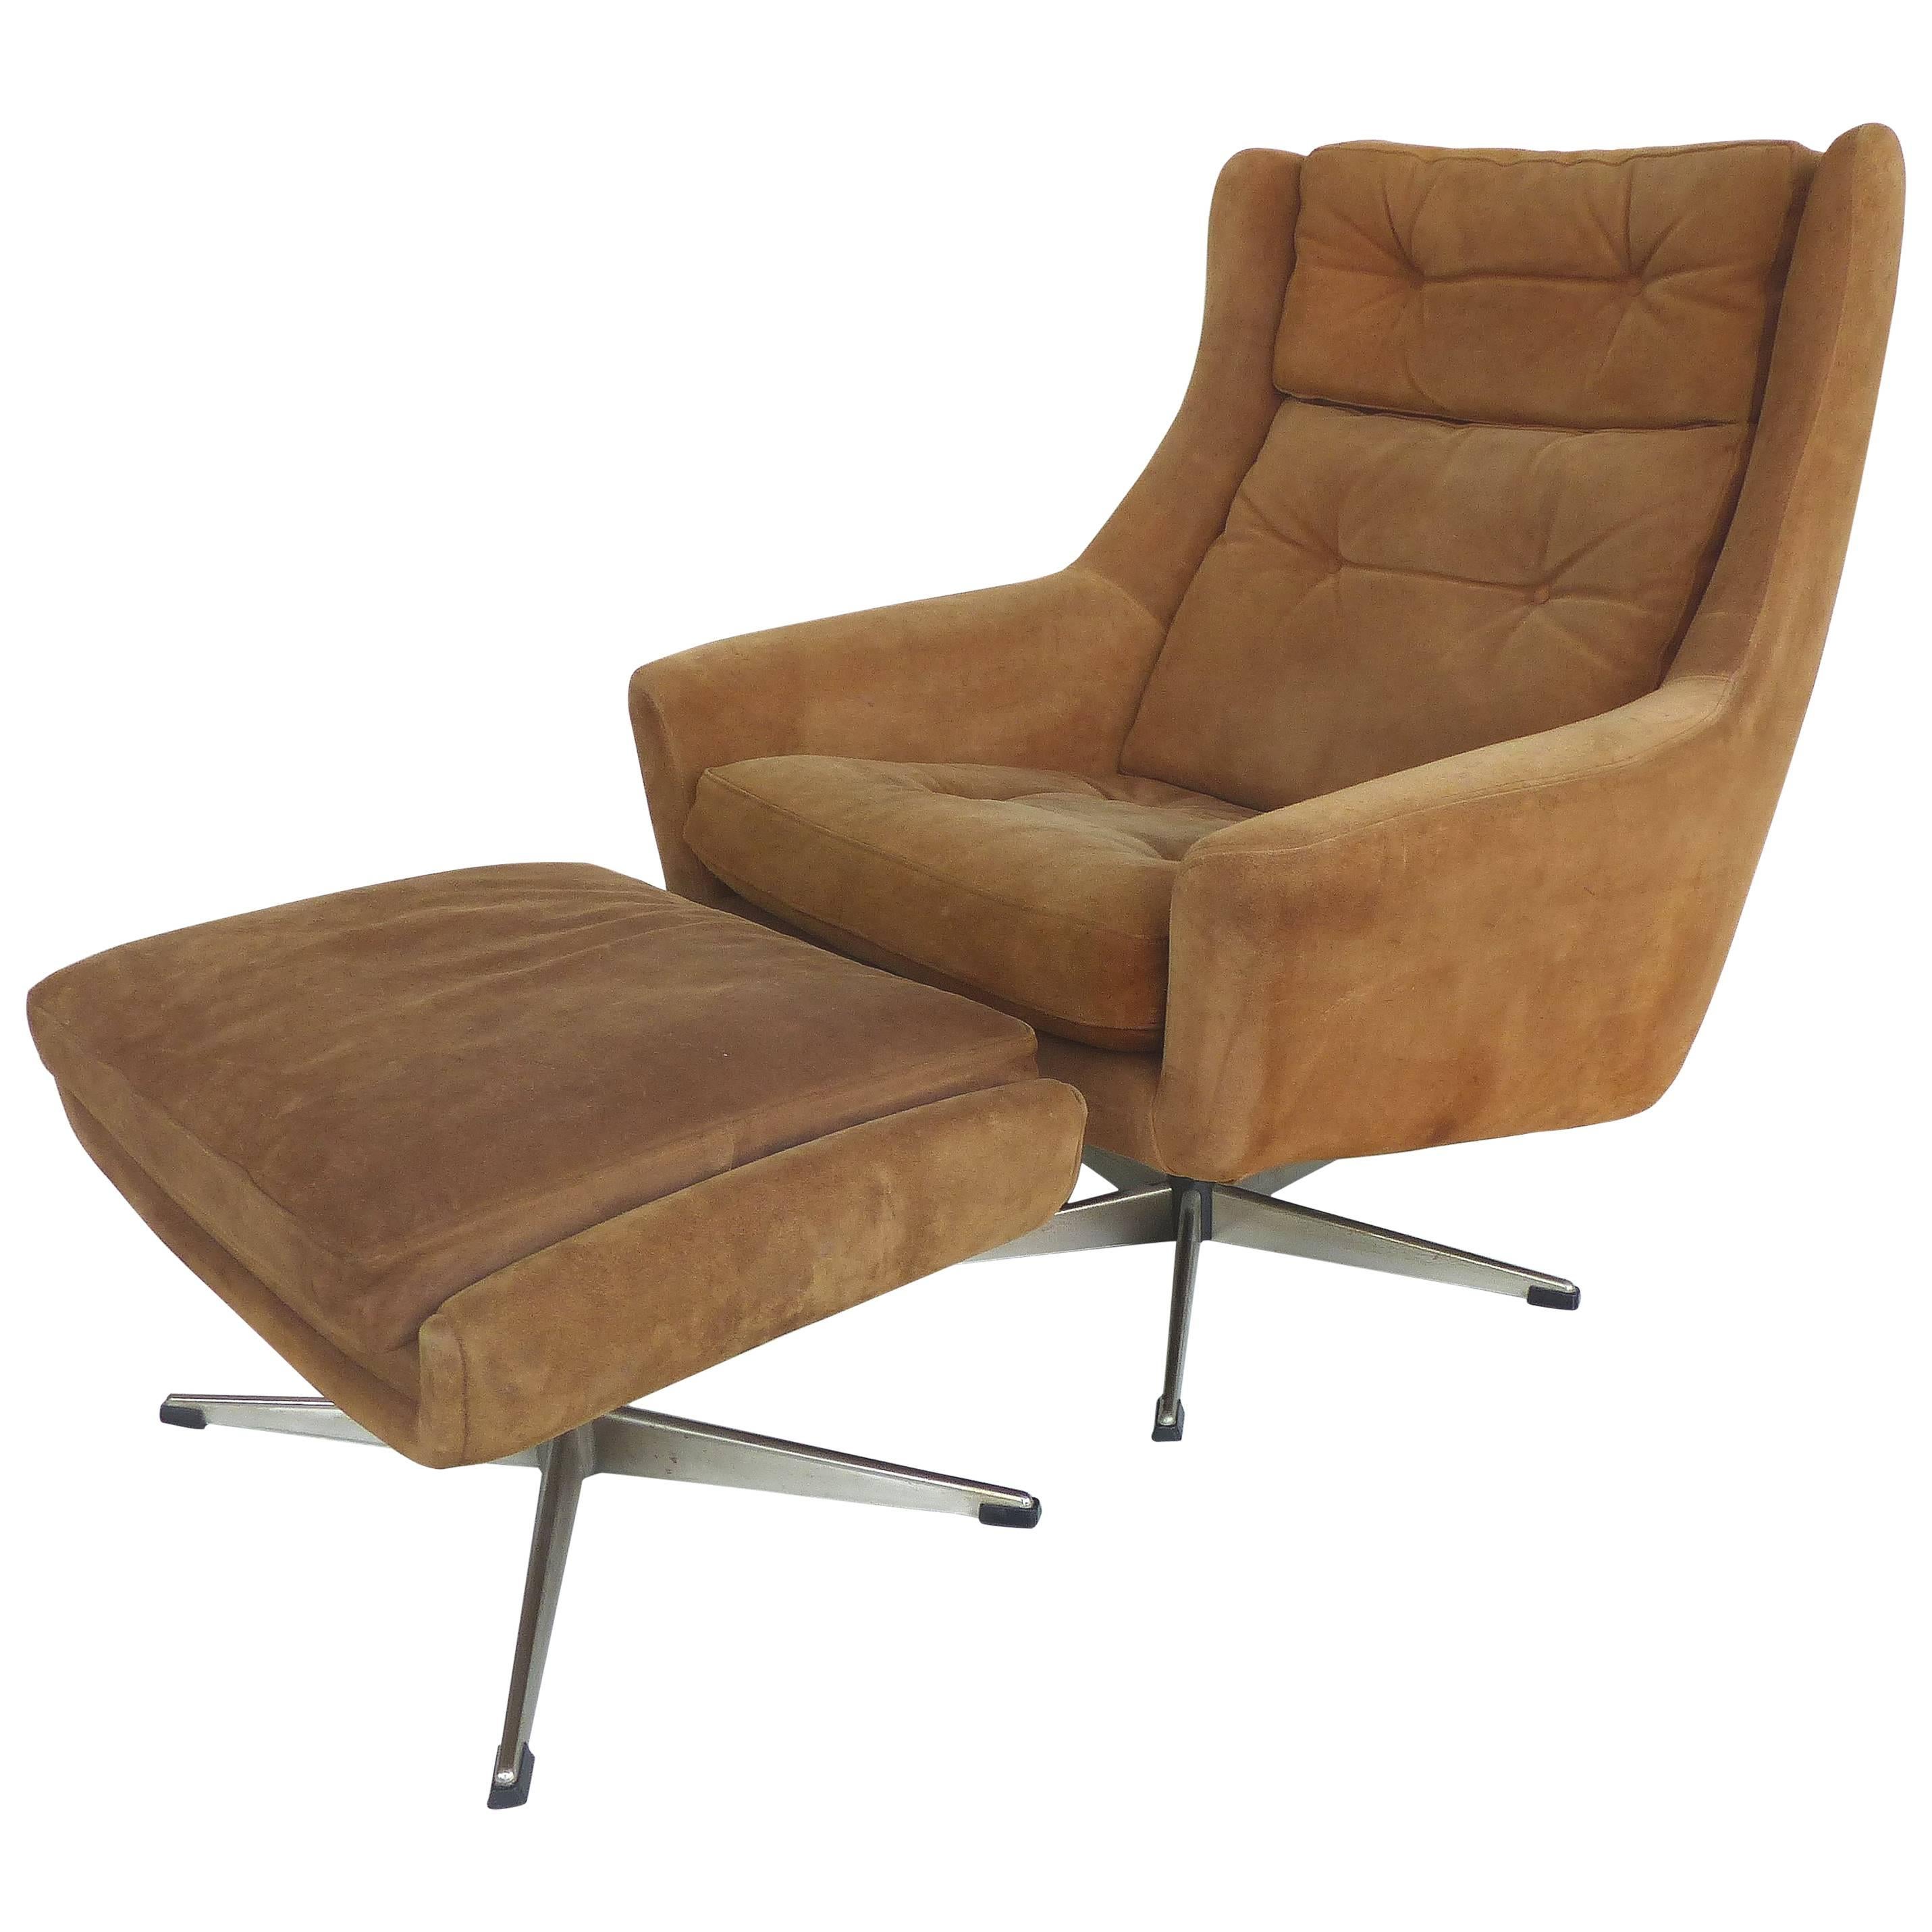 Danish Mid-Century Suede Swivel Chair with Ottomans from John Stuart